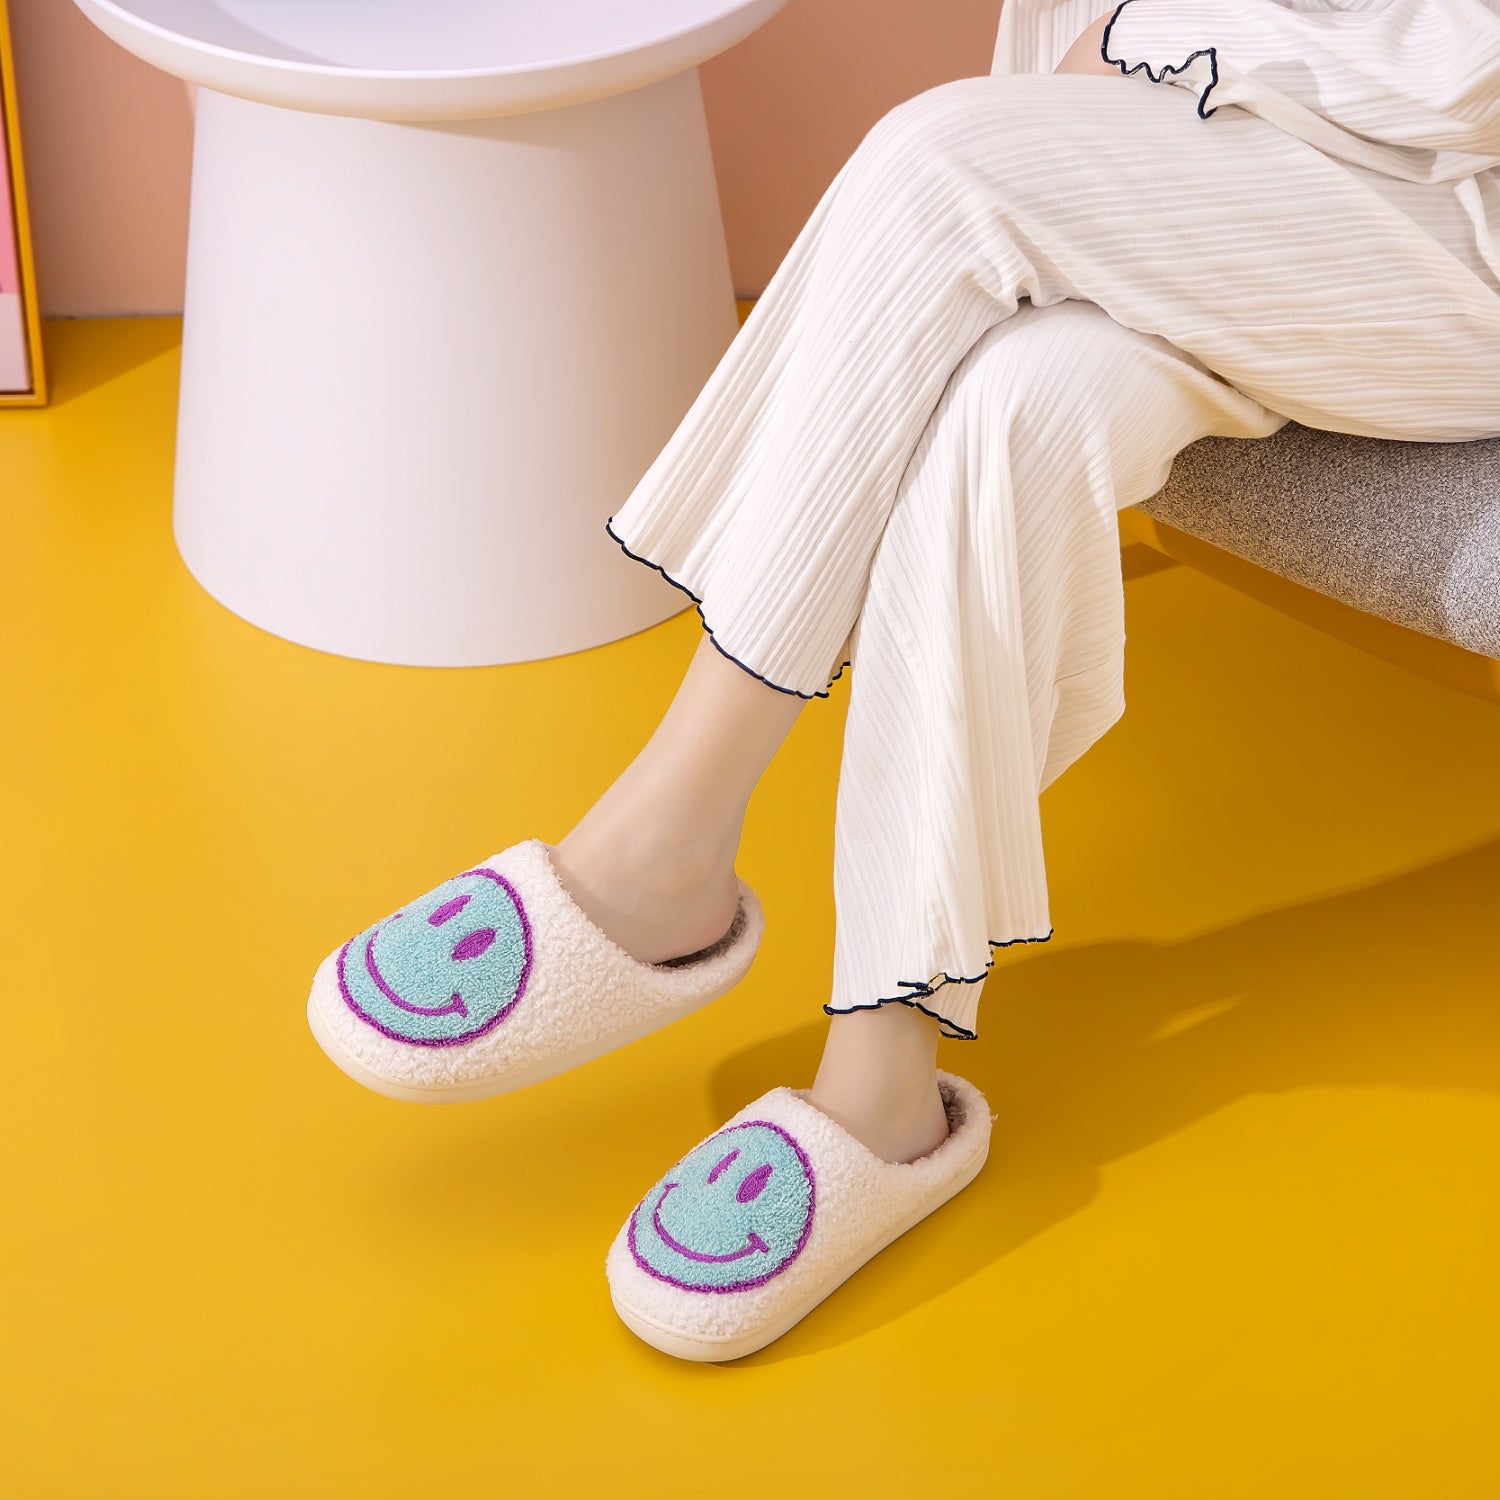 Blue Zone Planet |  Melody Smiley Face Slippers BLUE ZONE PLANET